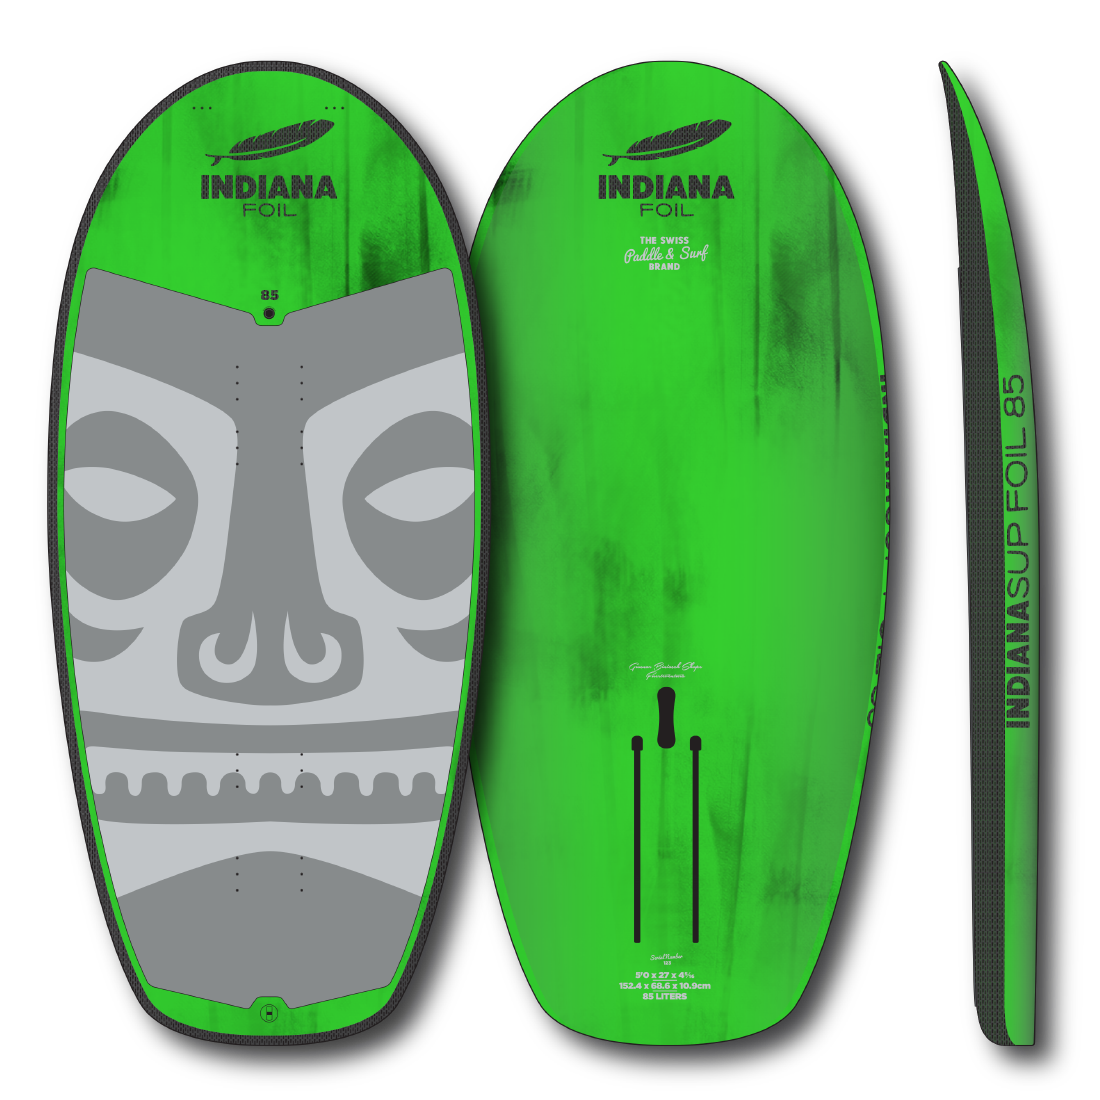 Indiana SUP/Wing Foil 85 L Carbon +